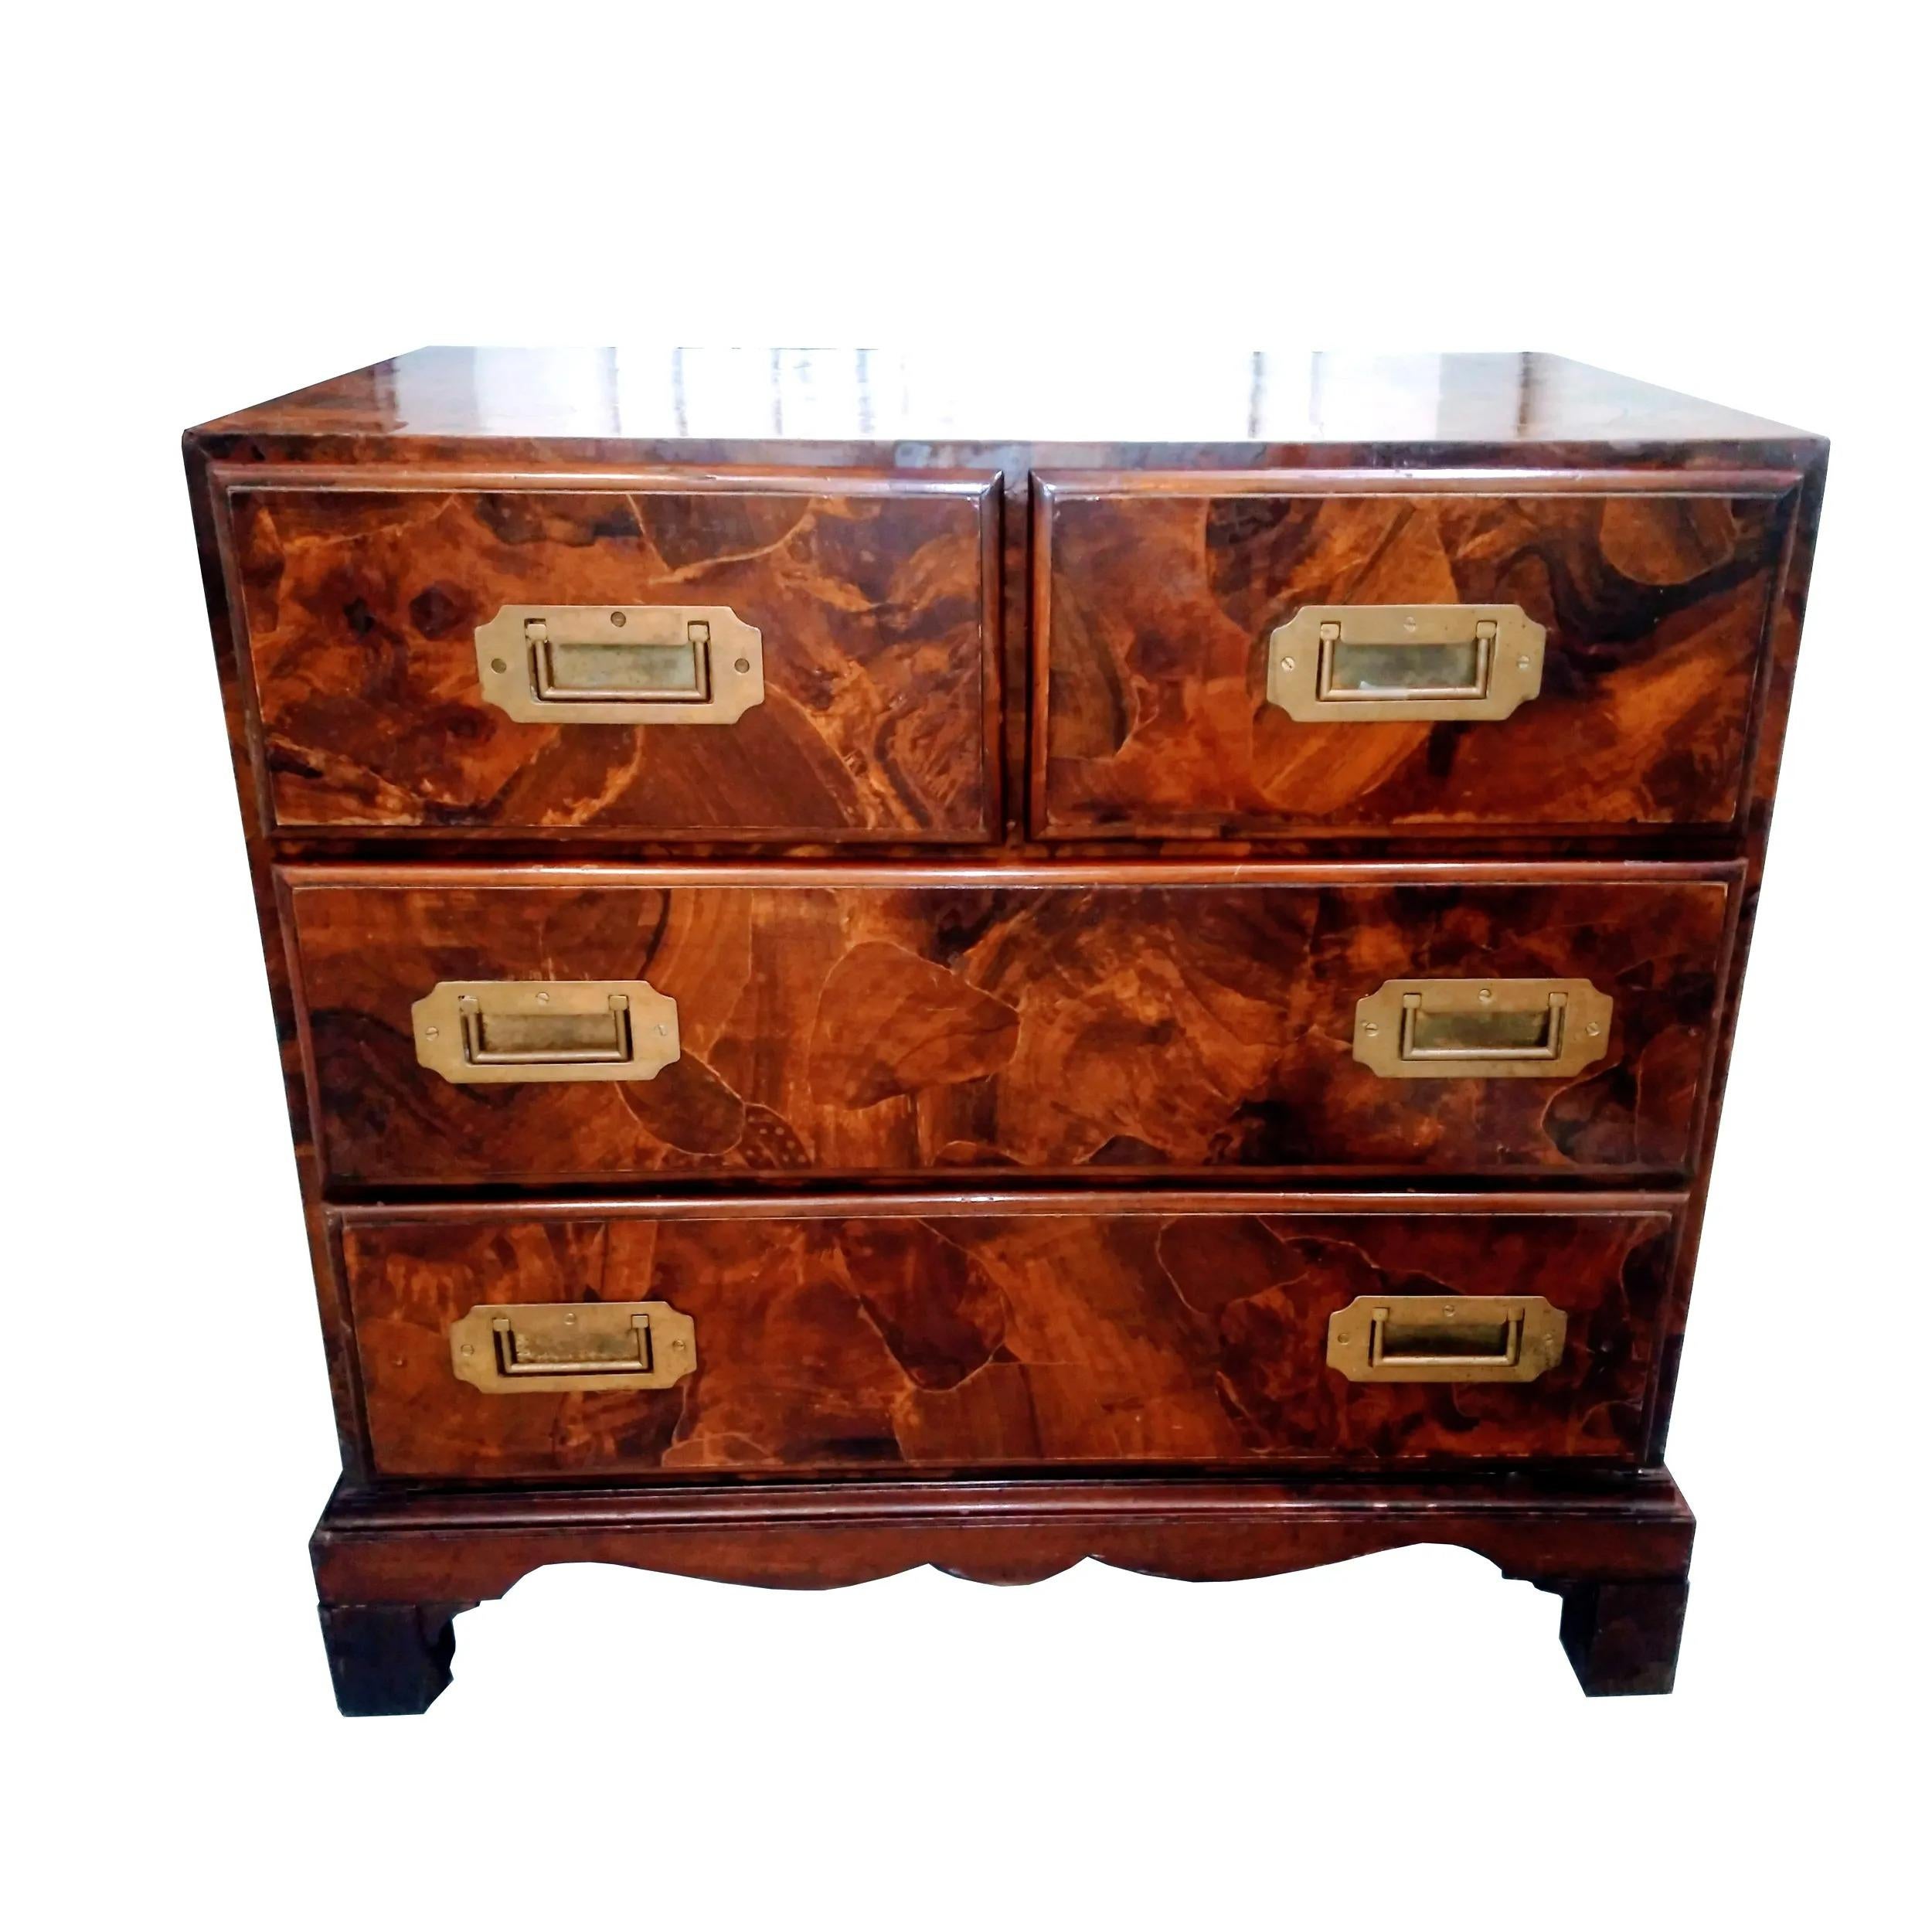 Vintage Burl Campaign Chest

Mid Century campaign dresser features rich burl resting on bracket feet.
Four drawers with recessed pulls.
